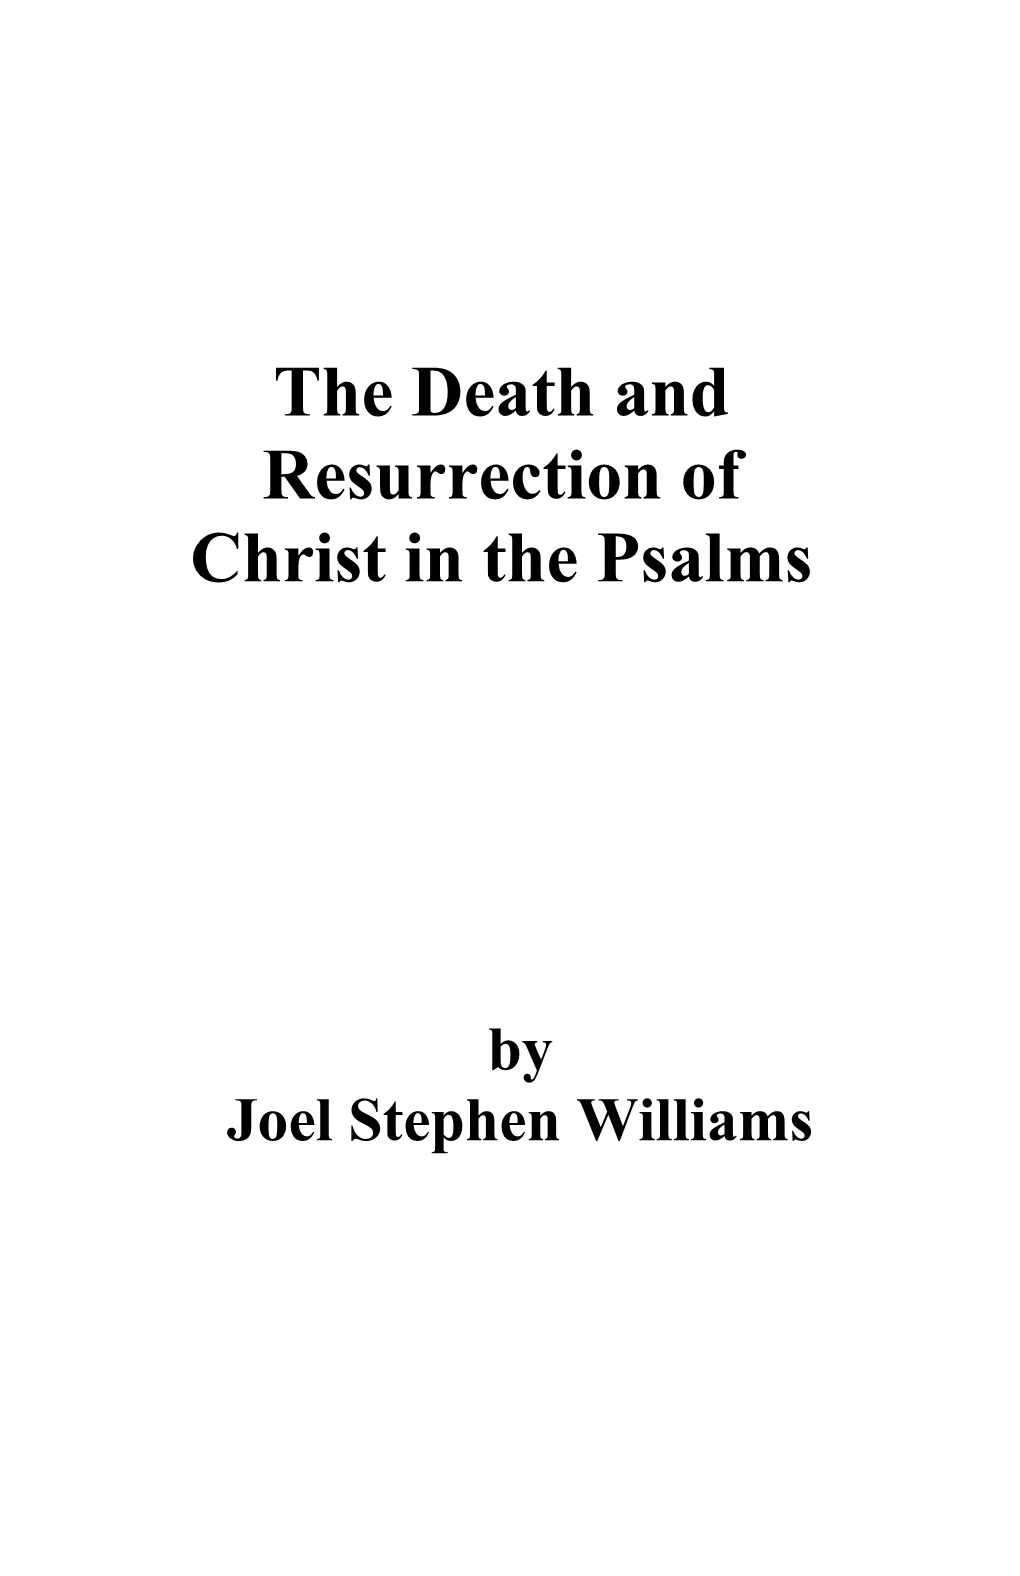 The Death and Resurrection